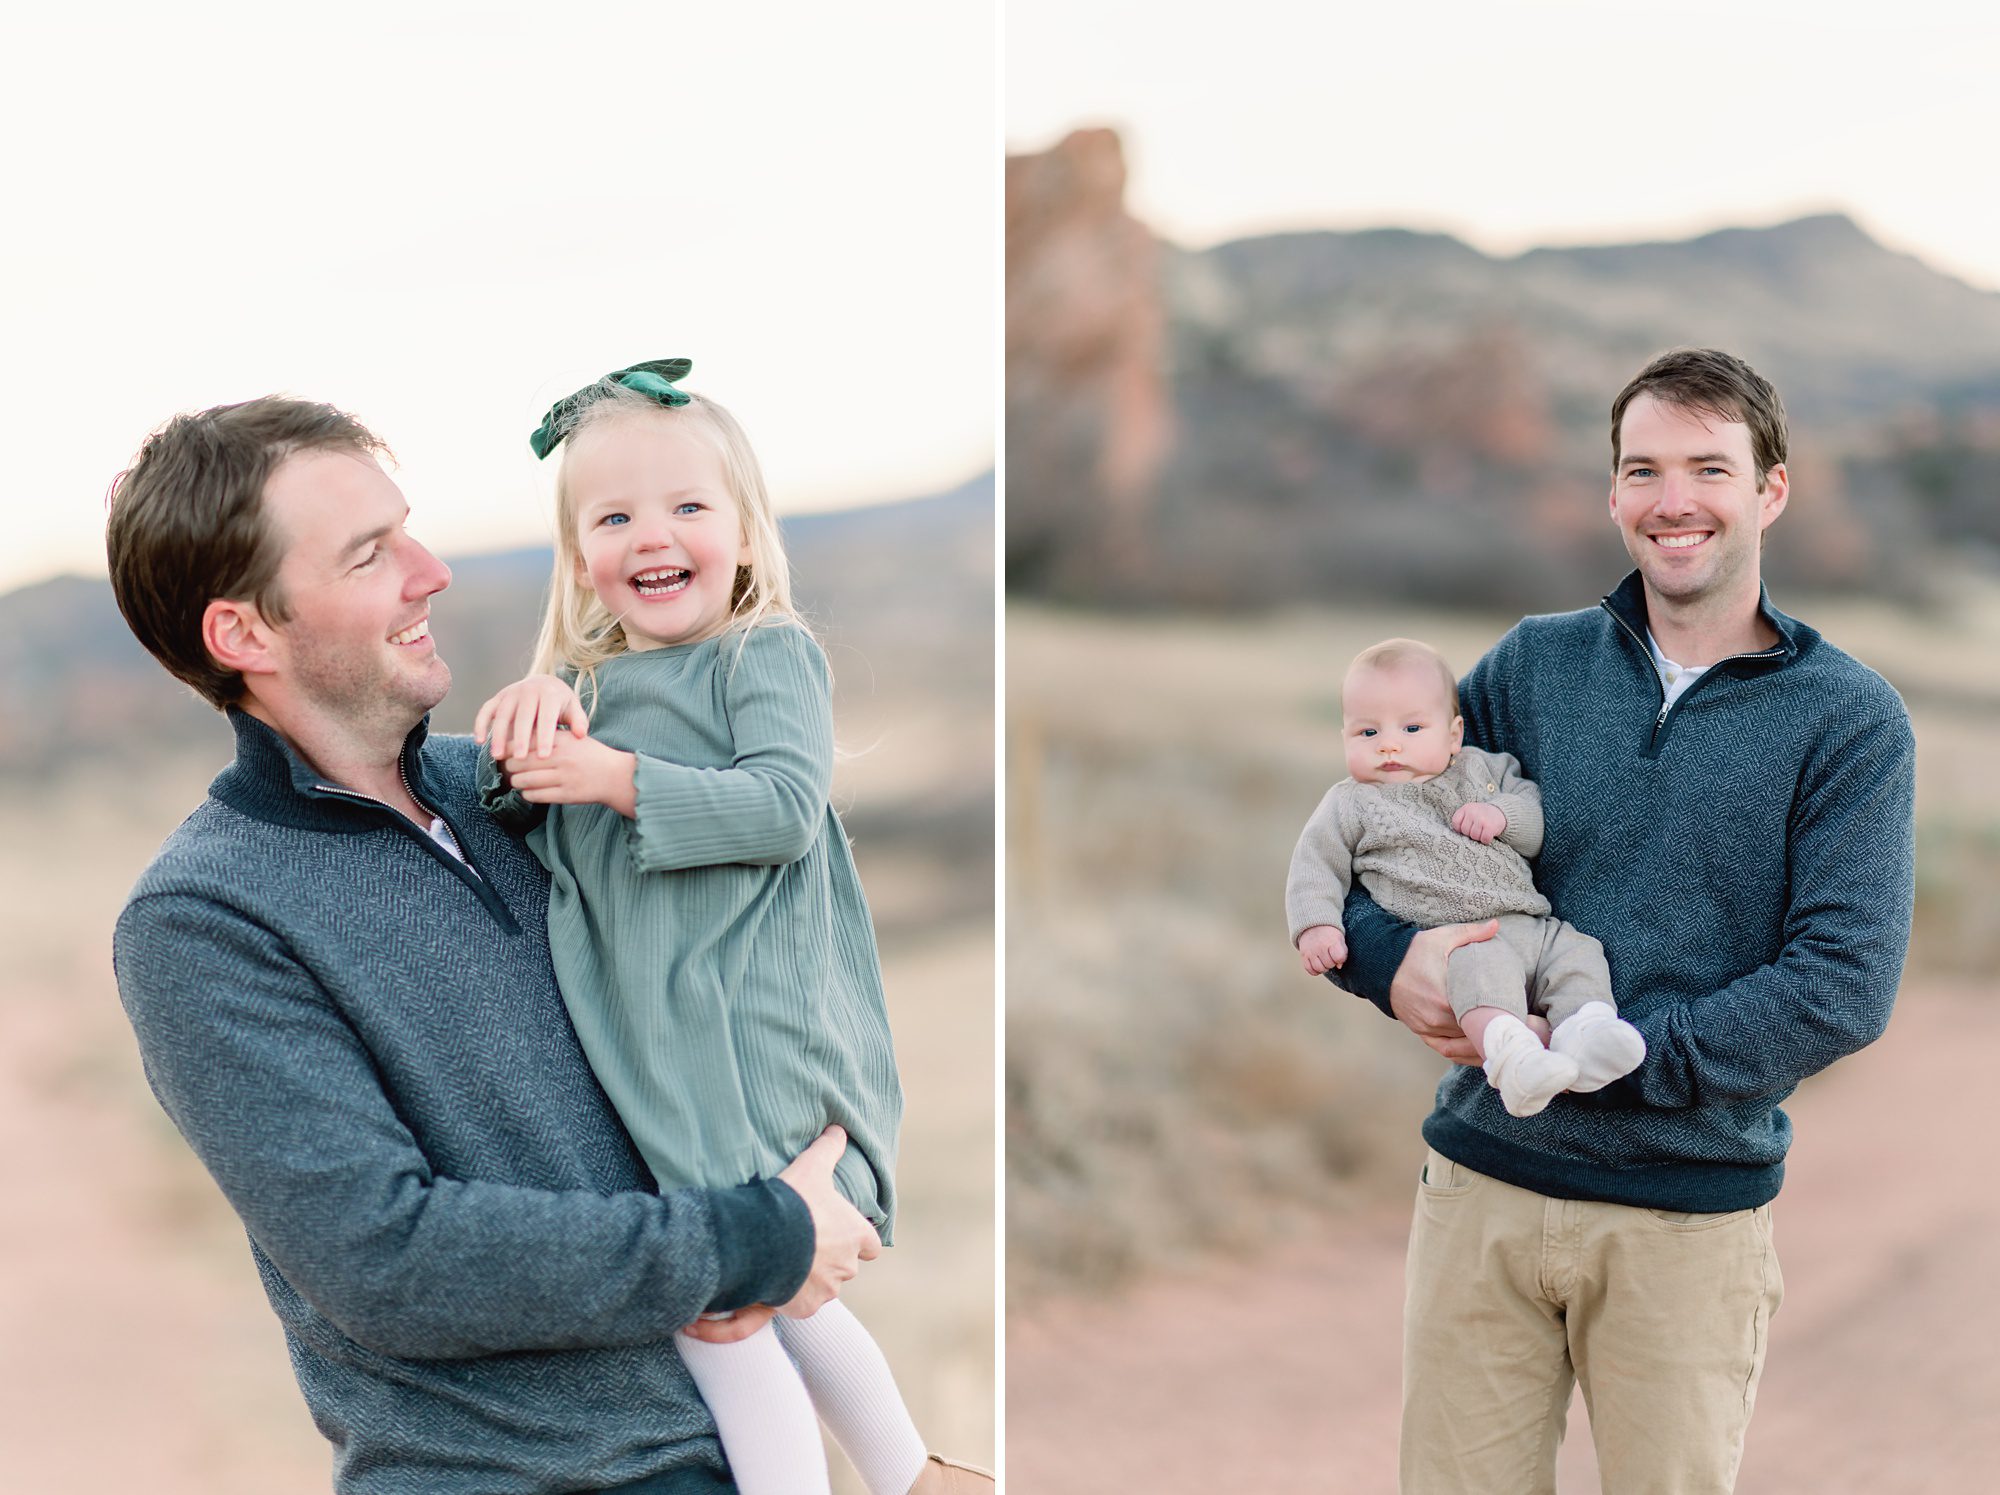 A sweet family of 4 with small children get family photos taken in Ken Caryl, CO with a beautiful mountain backdrop.